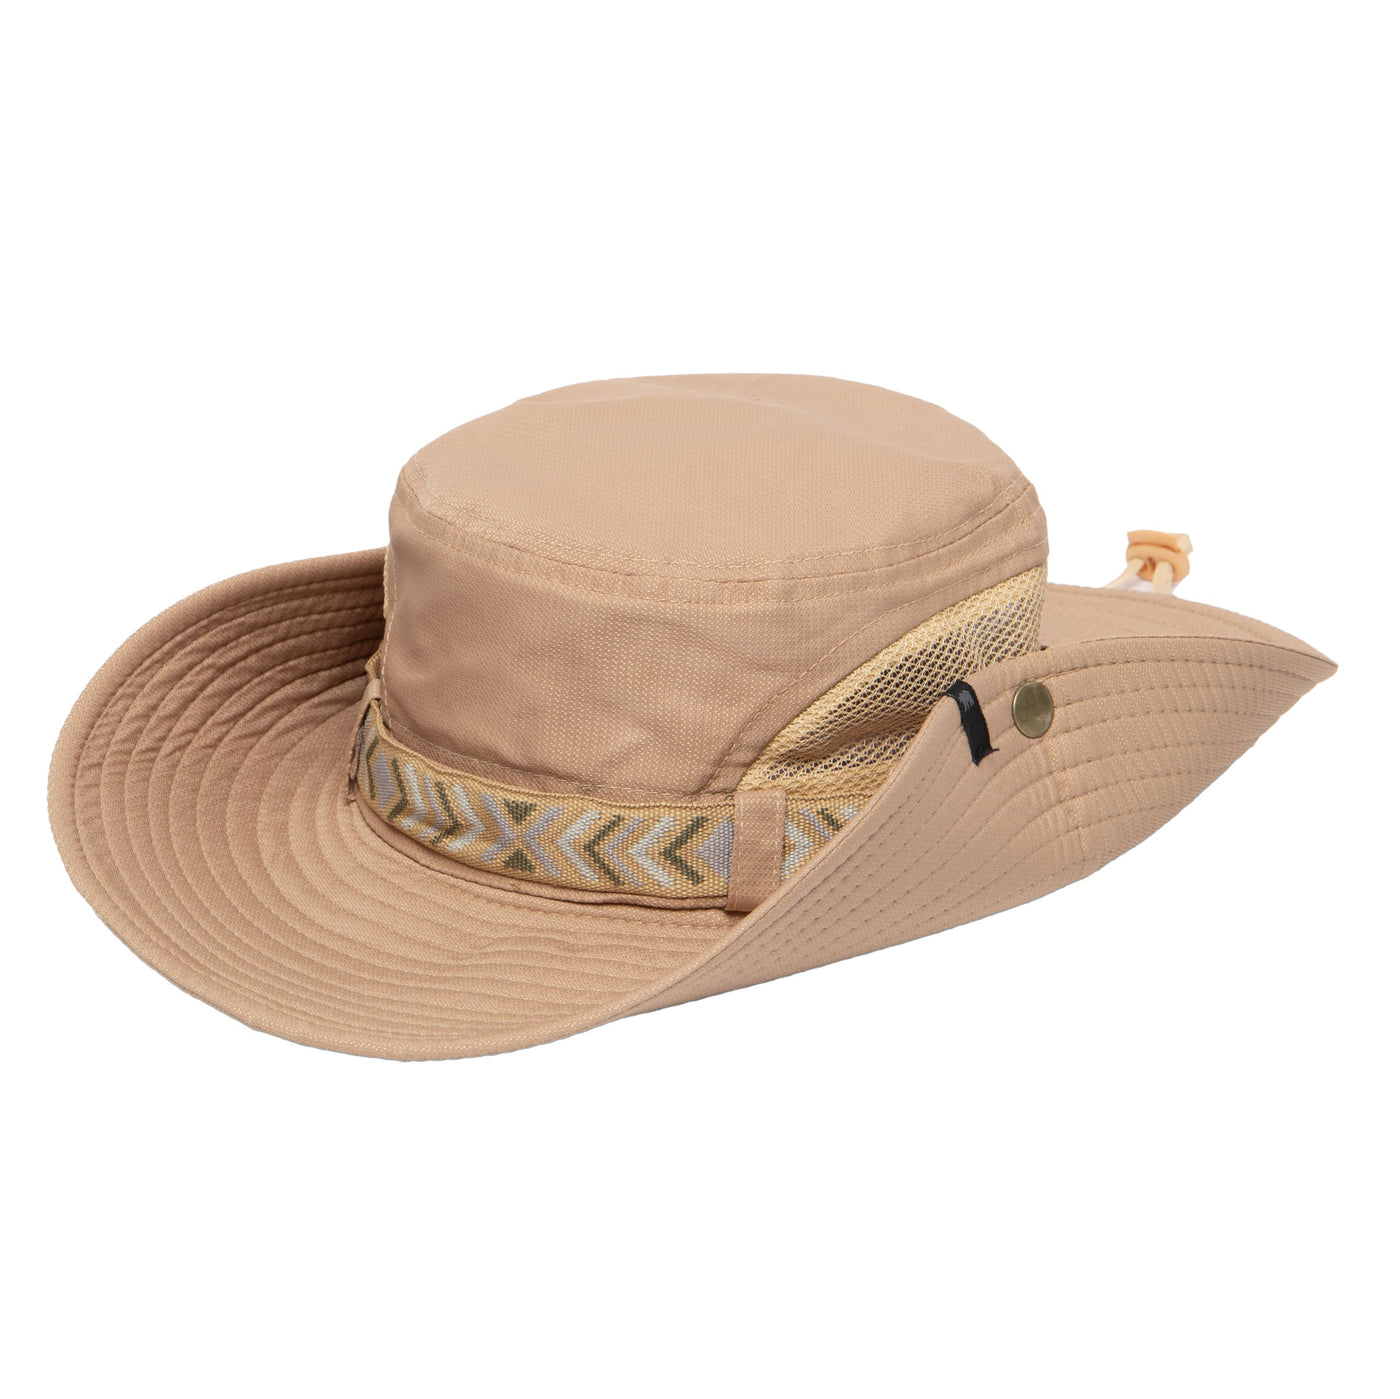 Wide Brim Leather Dress Hat For Women Sunscreen, Fishing, Hunting